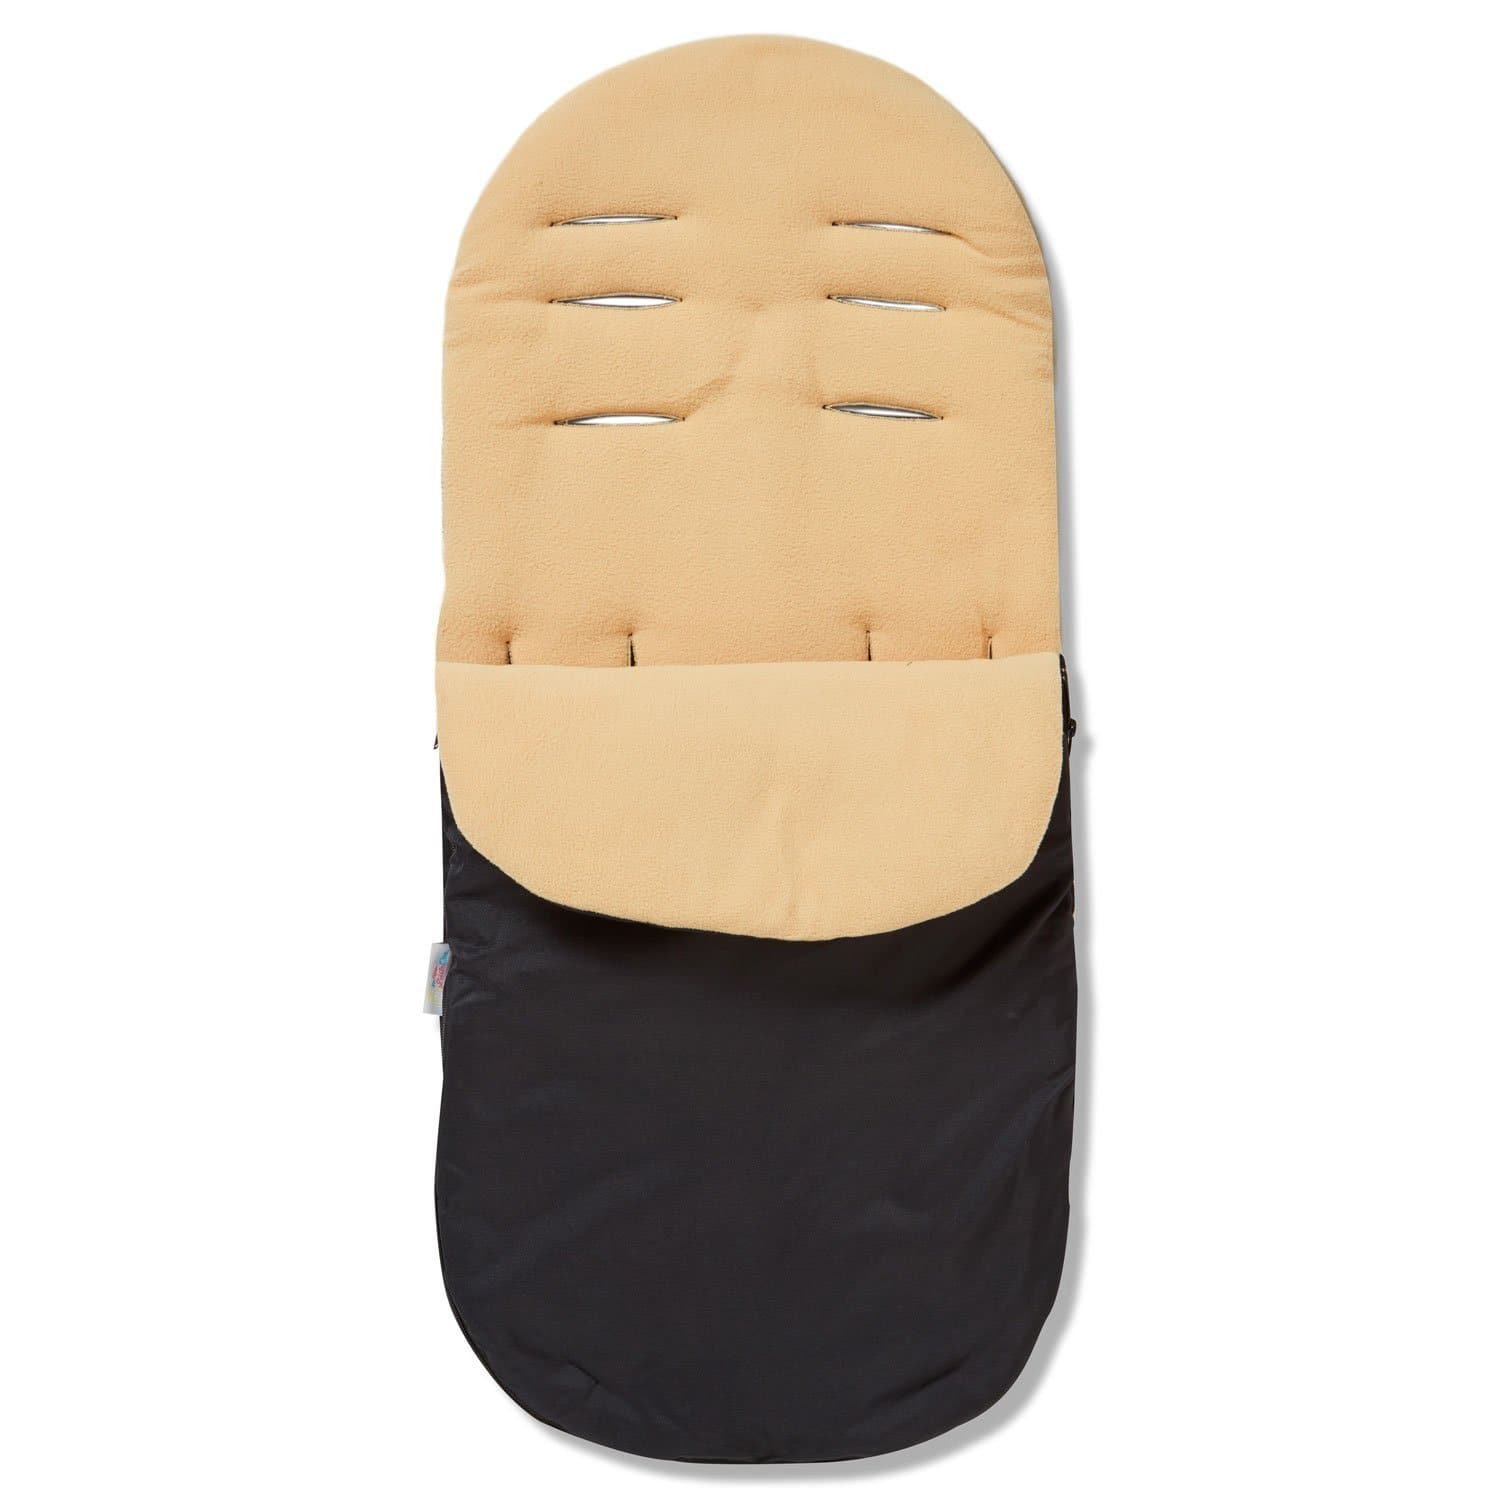 Footmuff / Cosy Toes Compatible with Egg - Sand / Fits All Models | For Your Little One